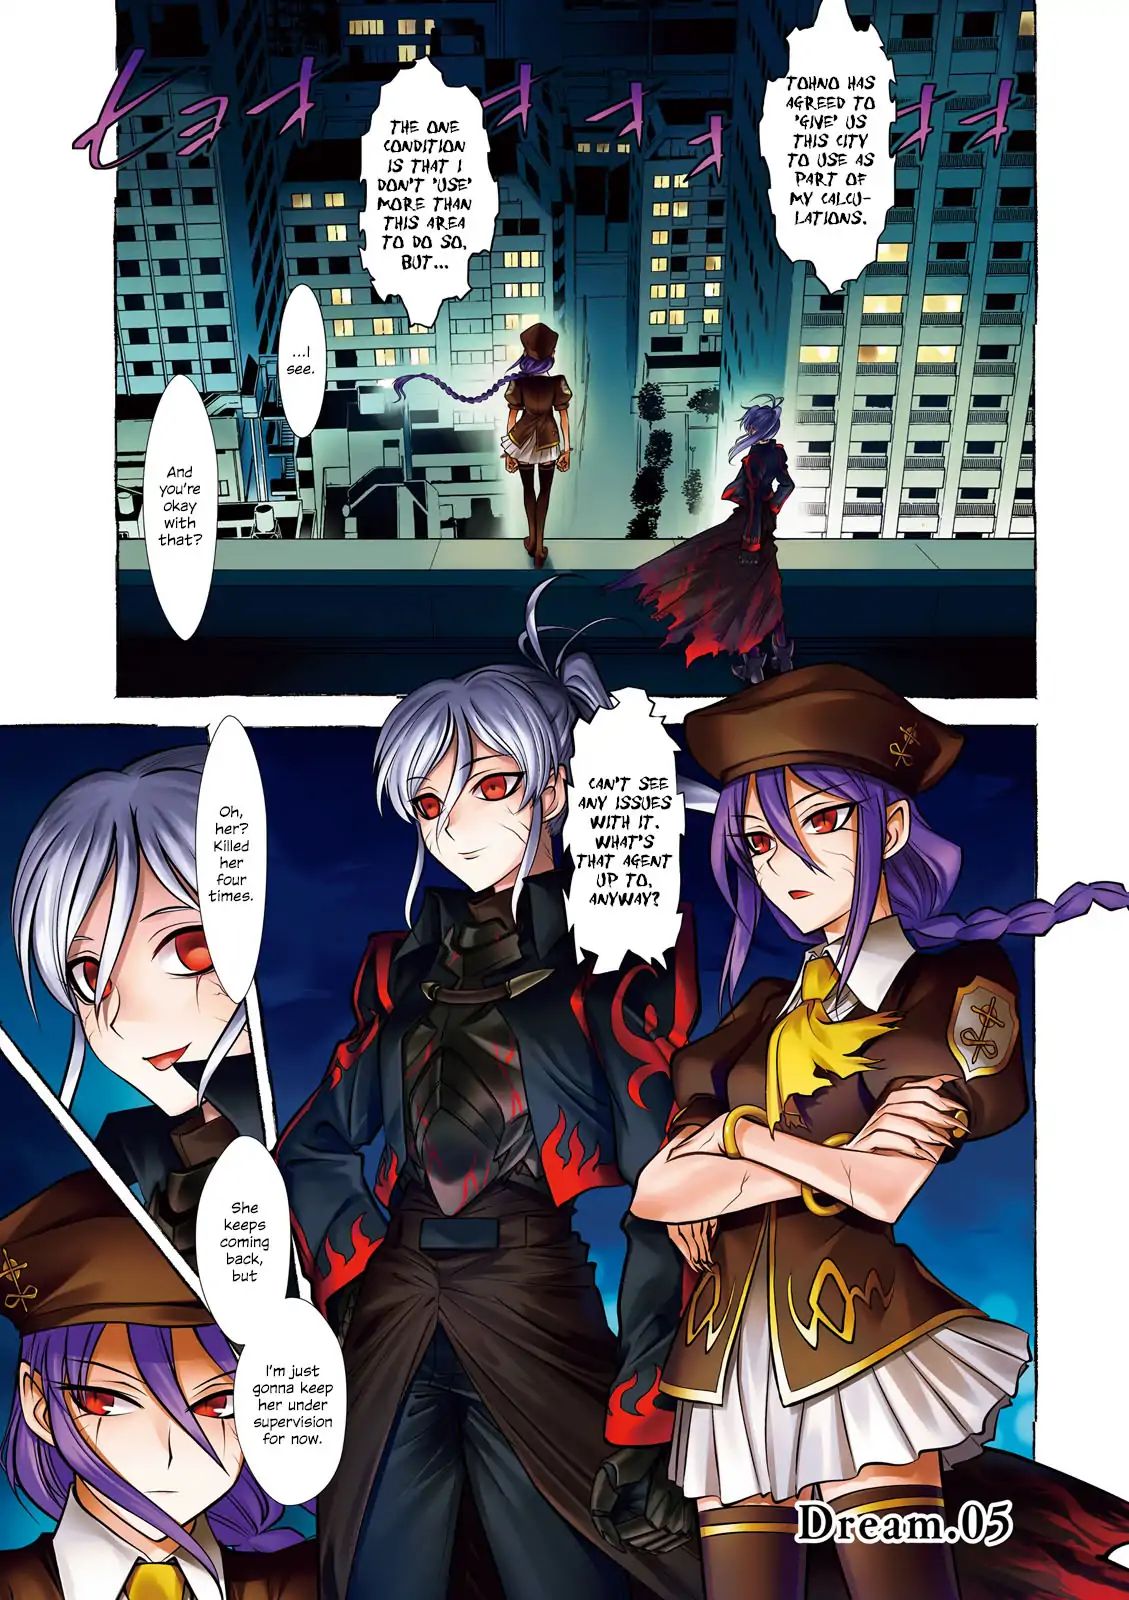 Melty Blood - Back Alley Alliance Nightmare Chapter 6 #1